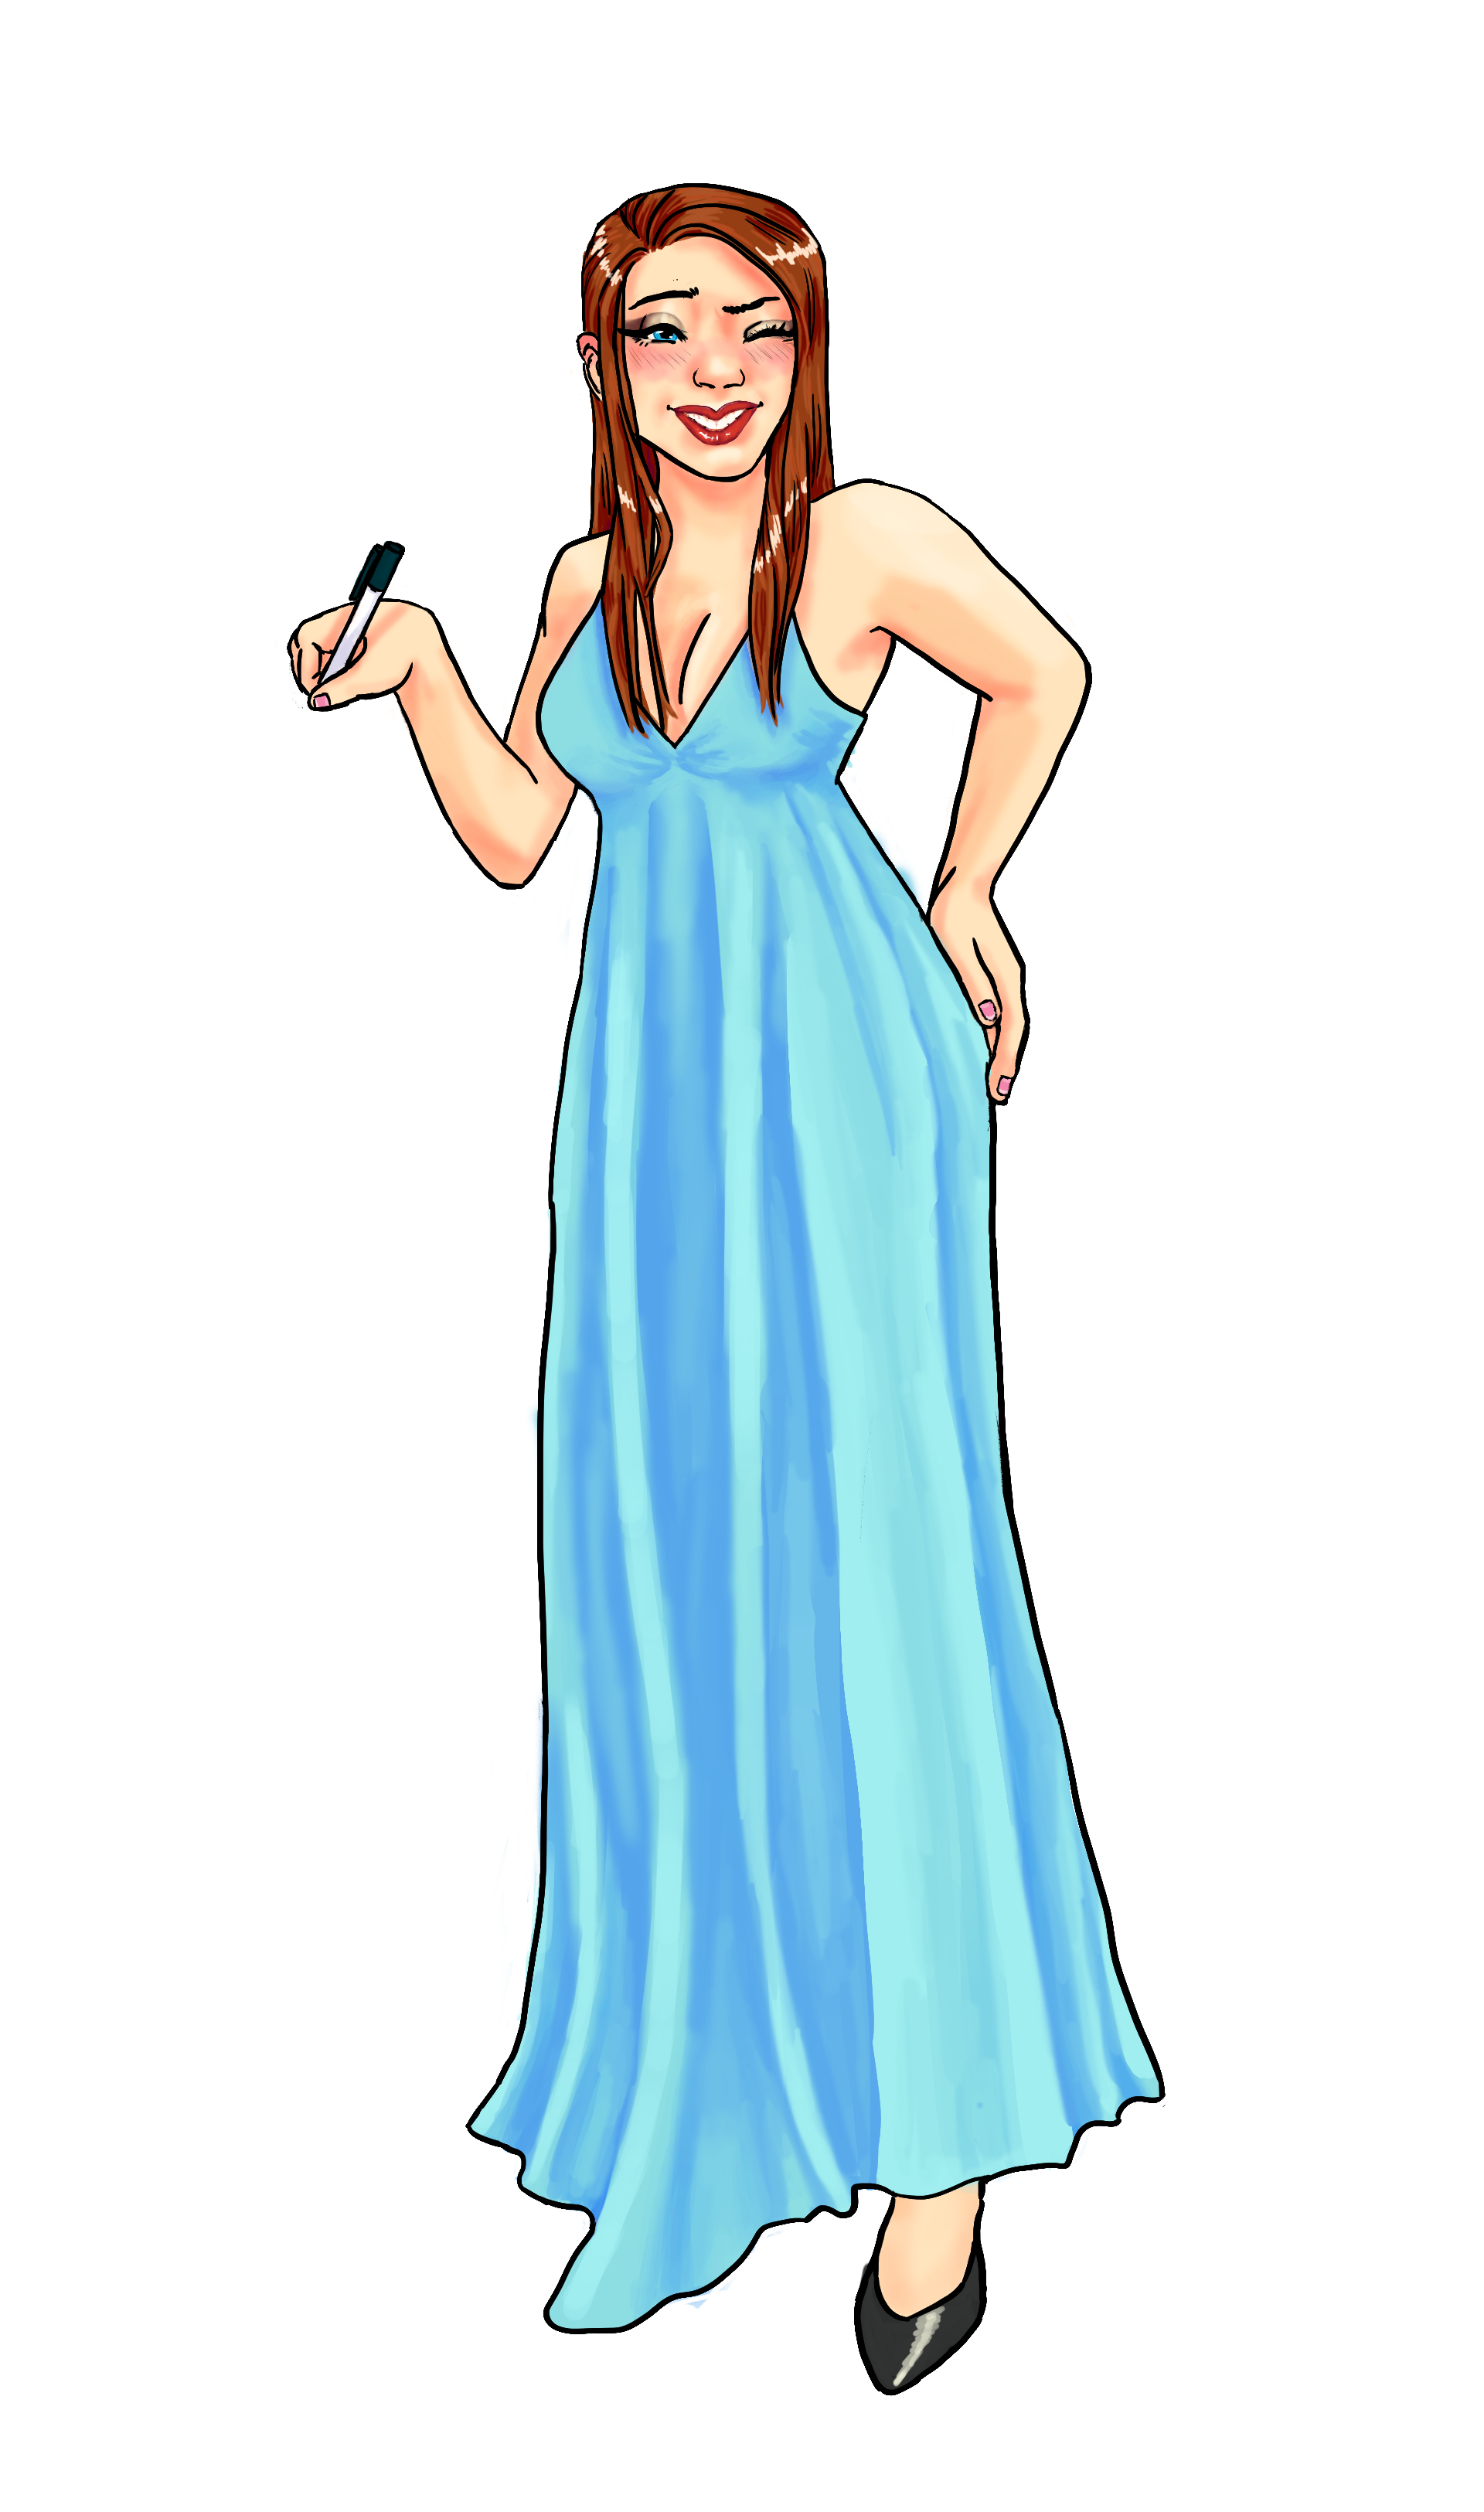 full body illustration of the muse smiling and holding a pen. she has long brown hair and a long, sleek blue dress.